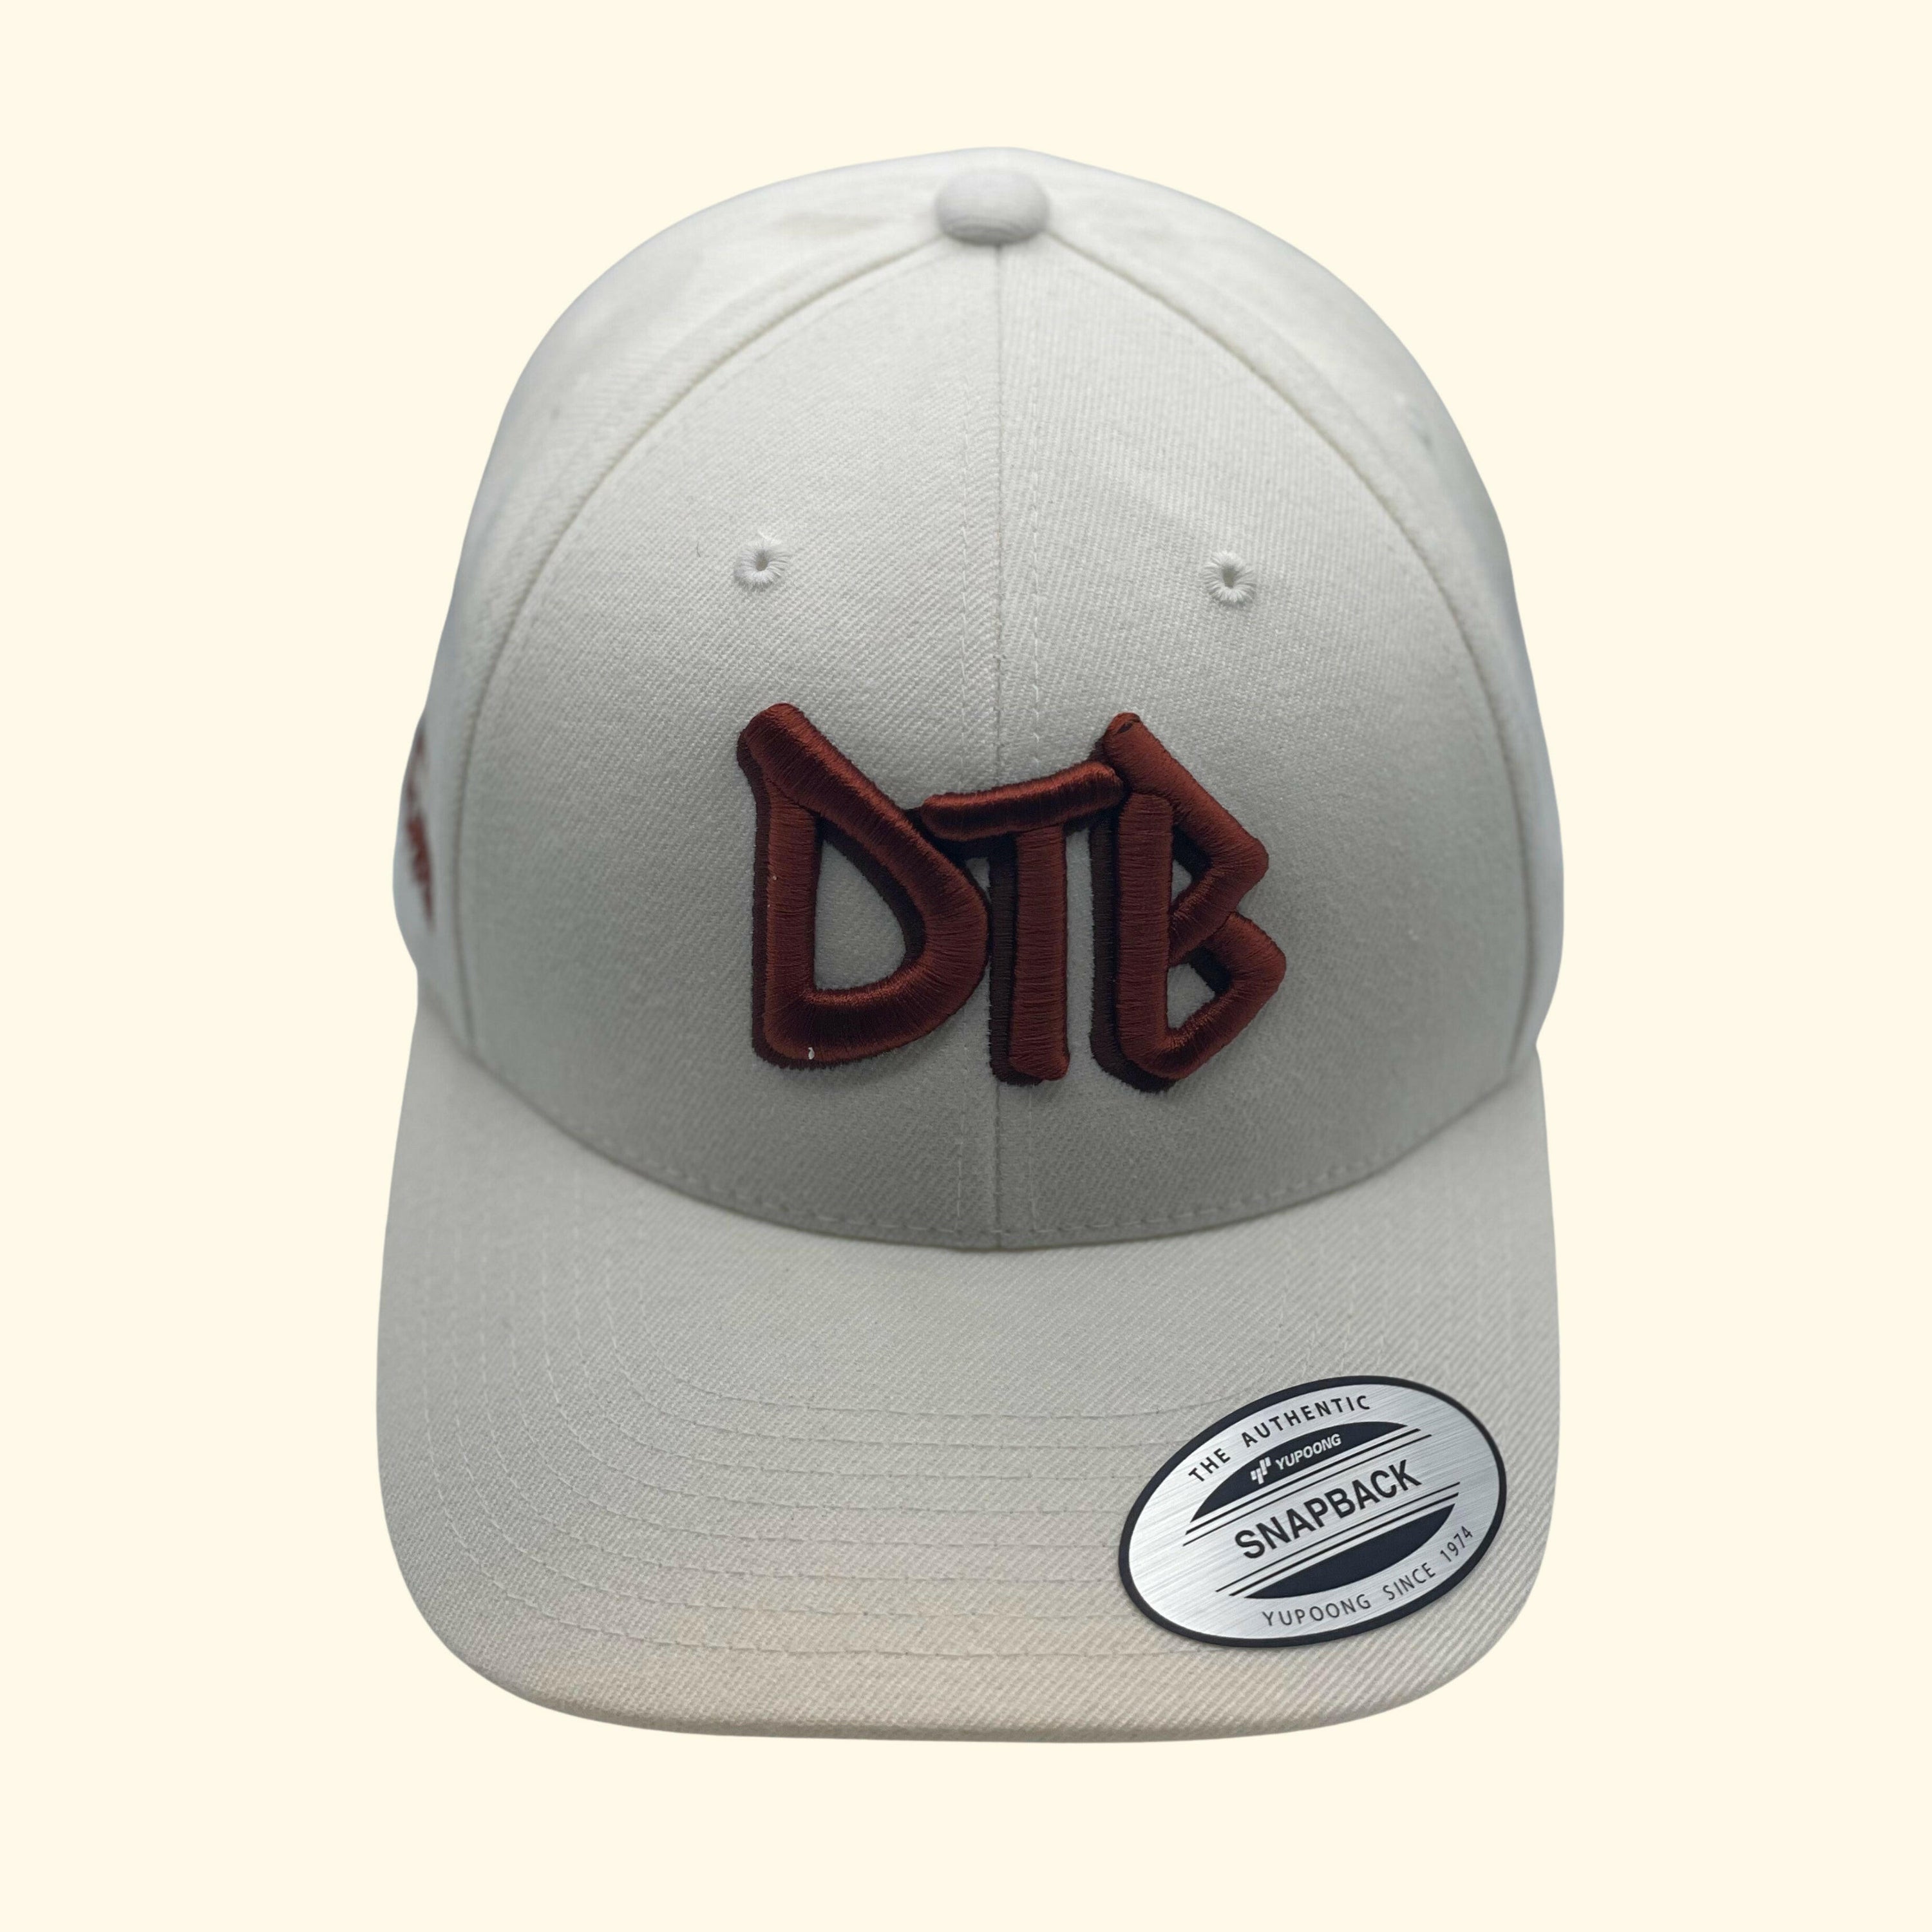 DTB Embroidered Badge White Snapback Cap